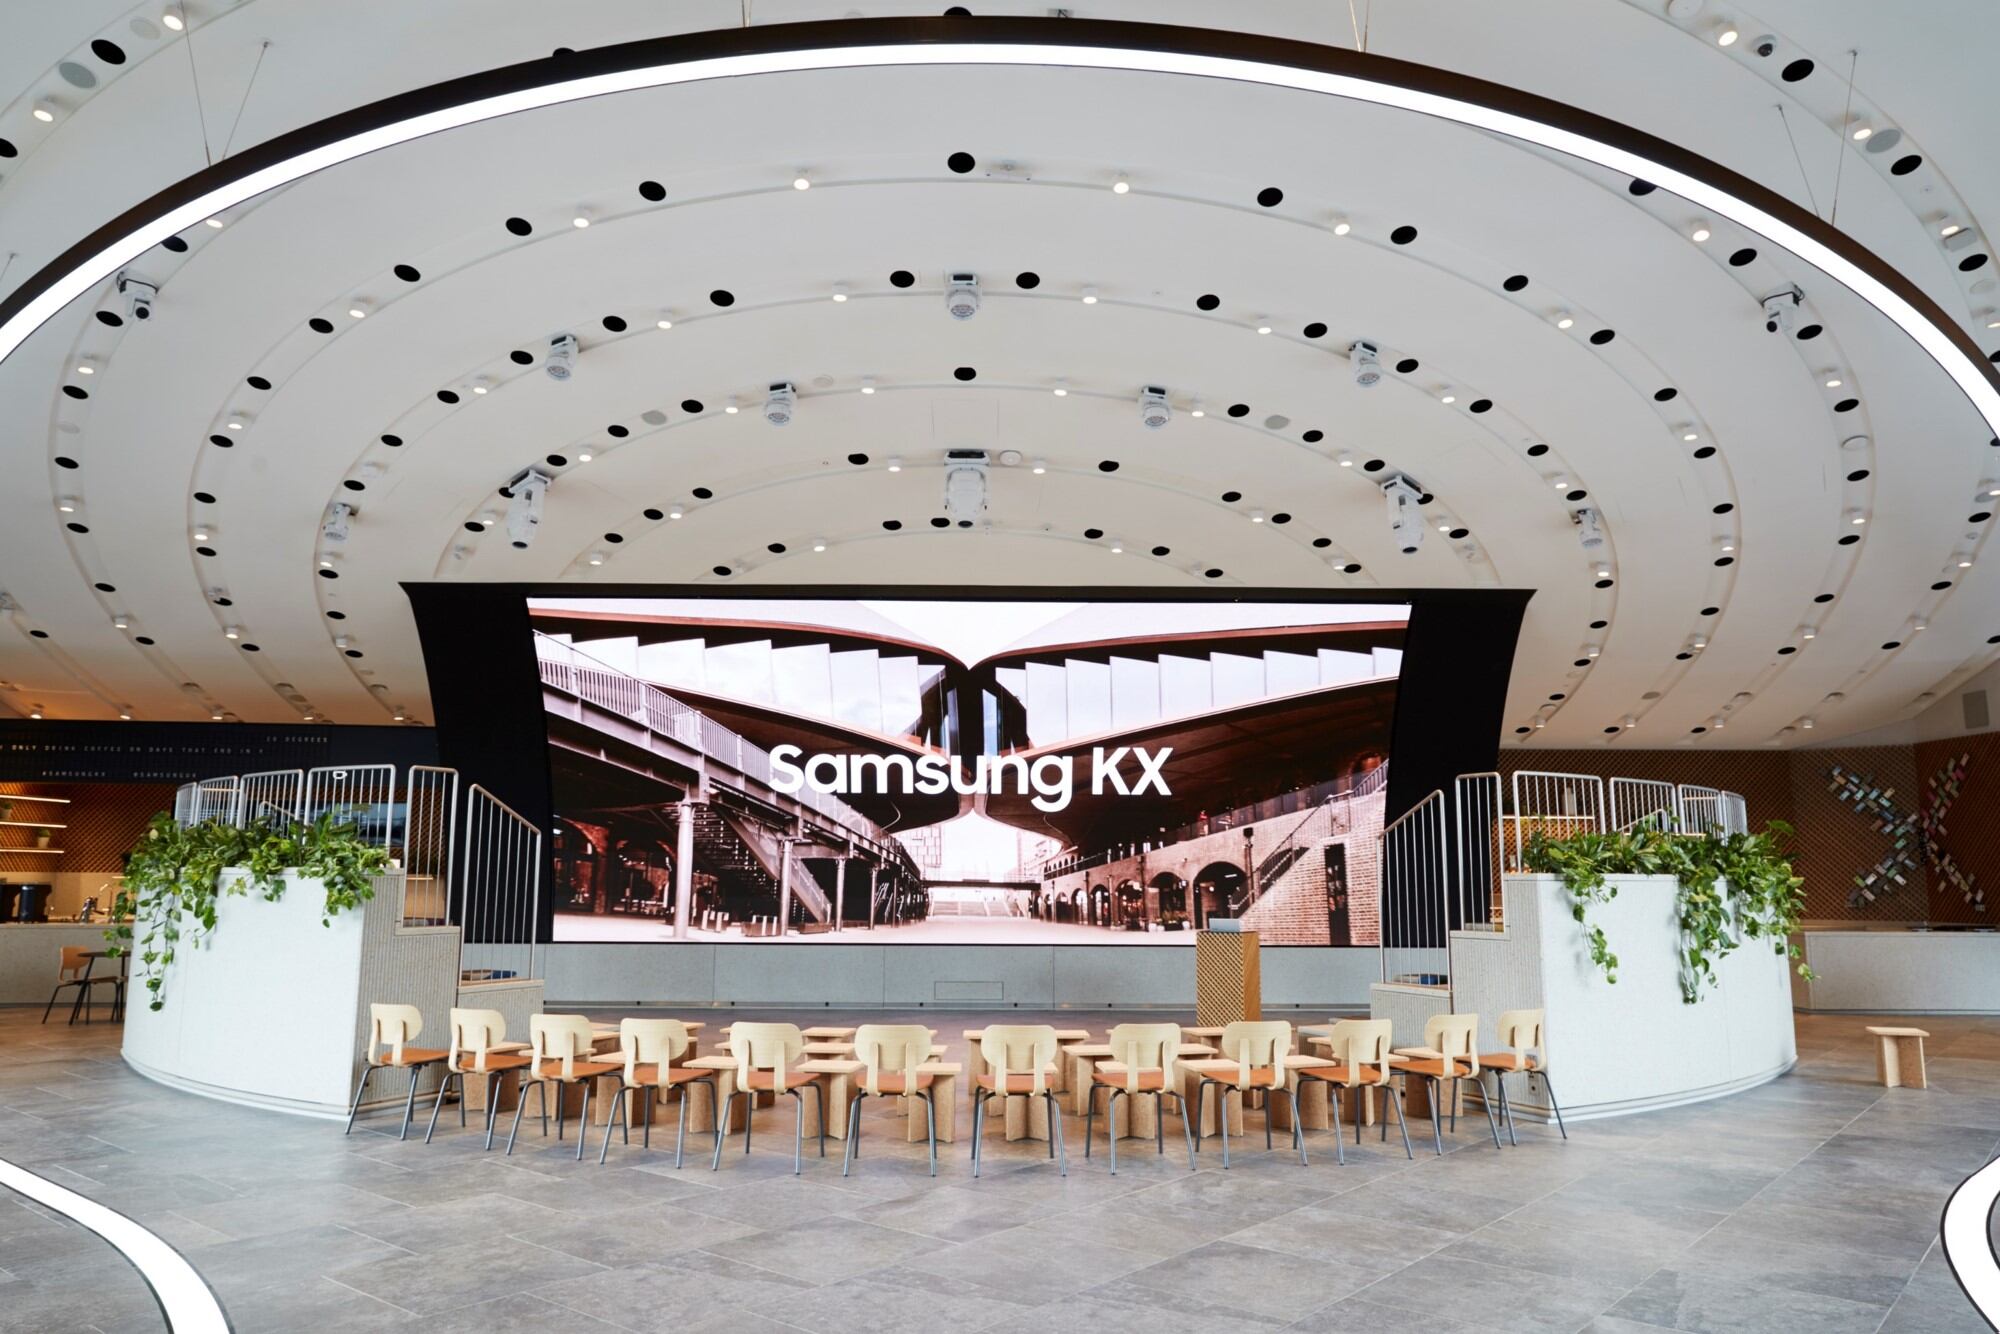 inside-samsung-kx-a-tech-playground-that-may-be-the-future-of-retail